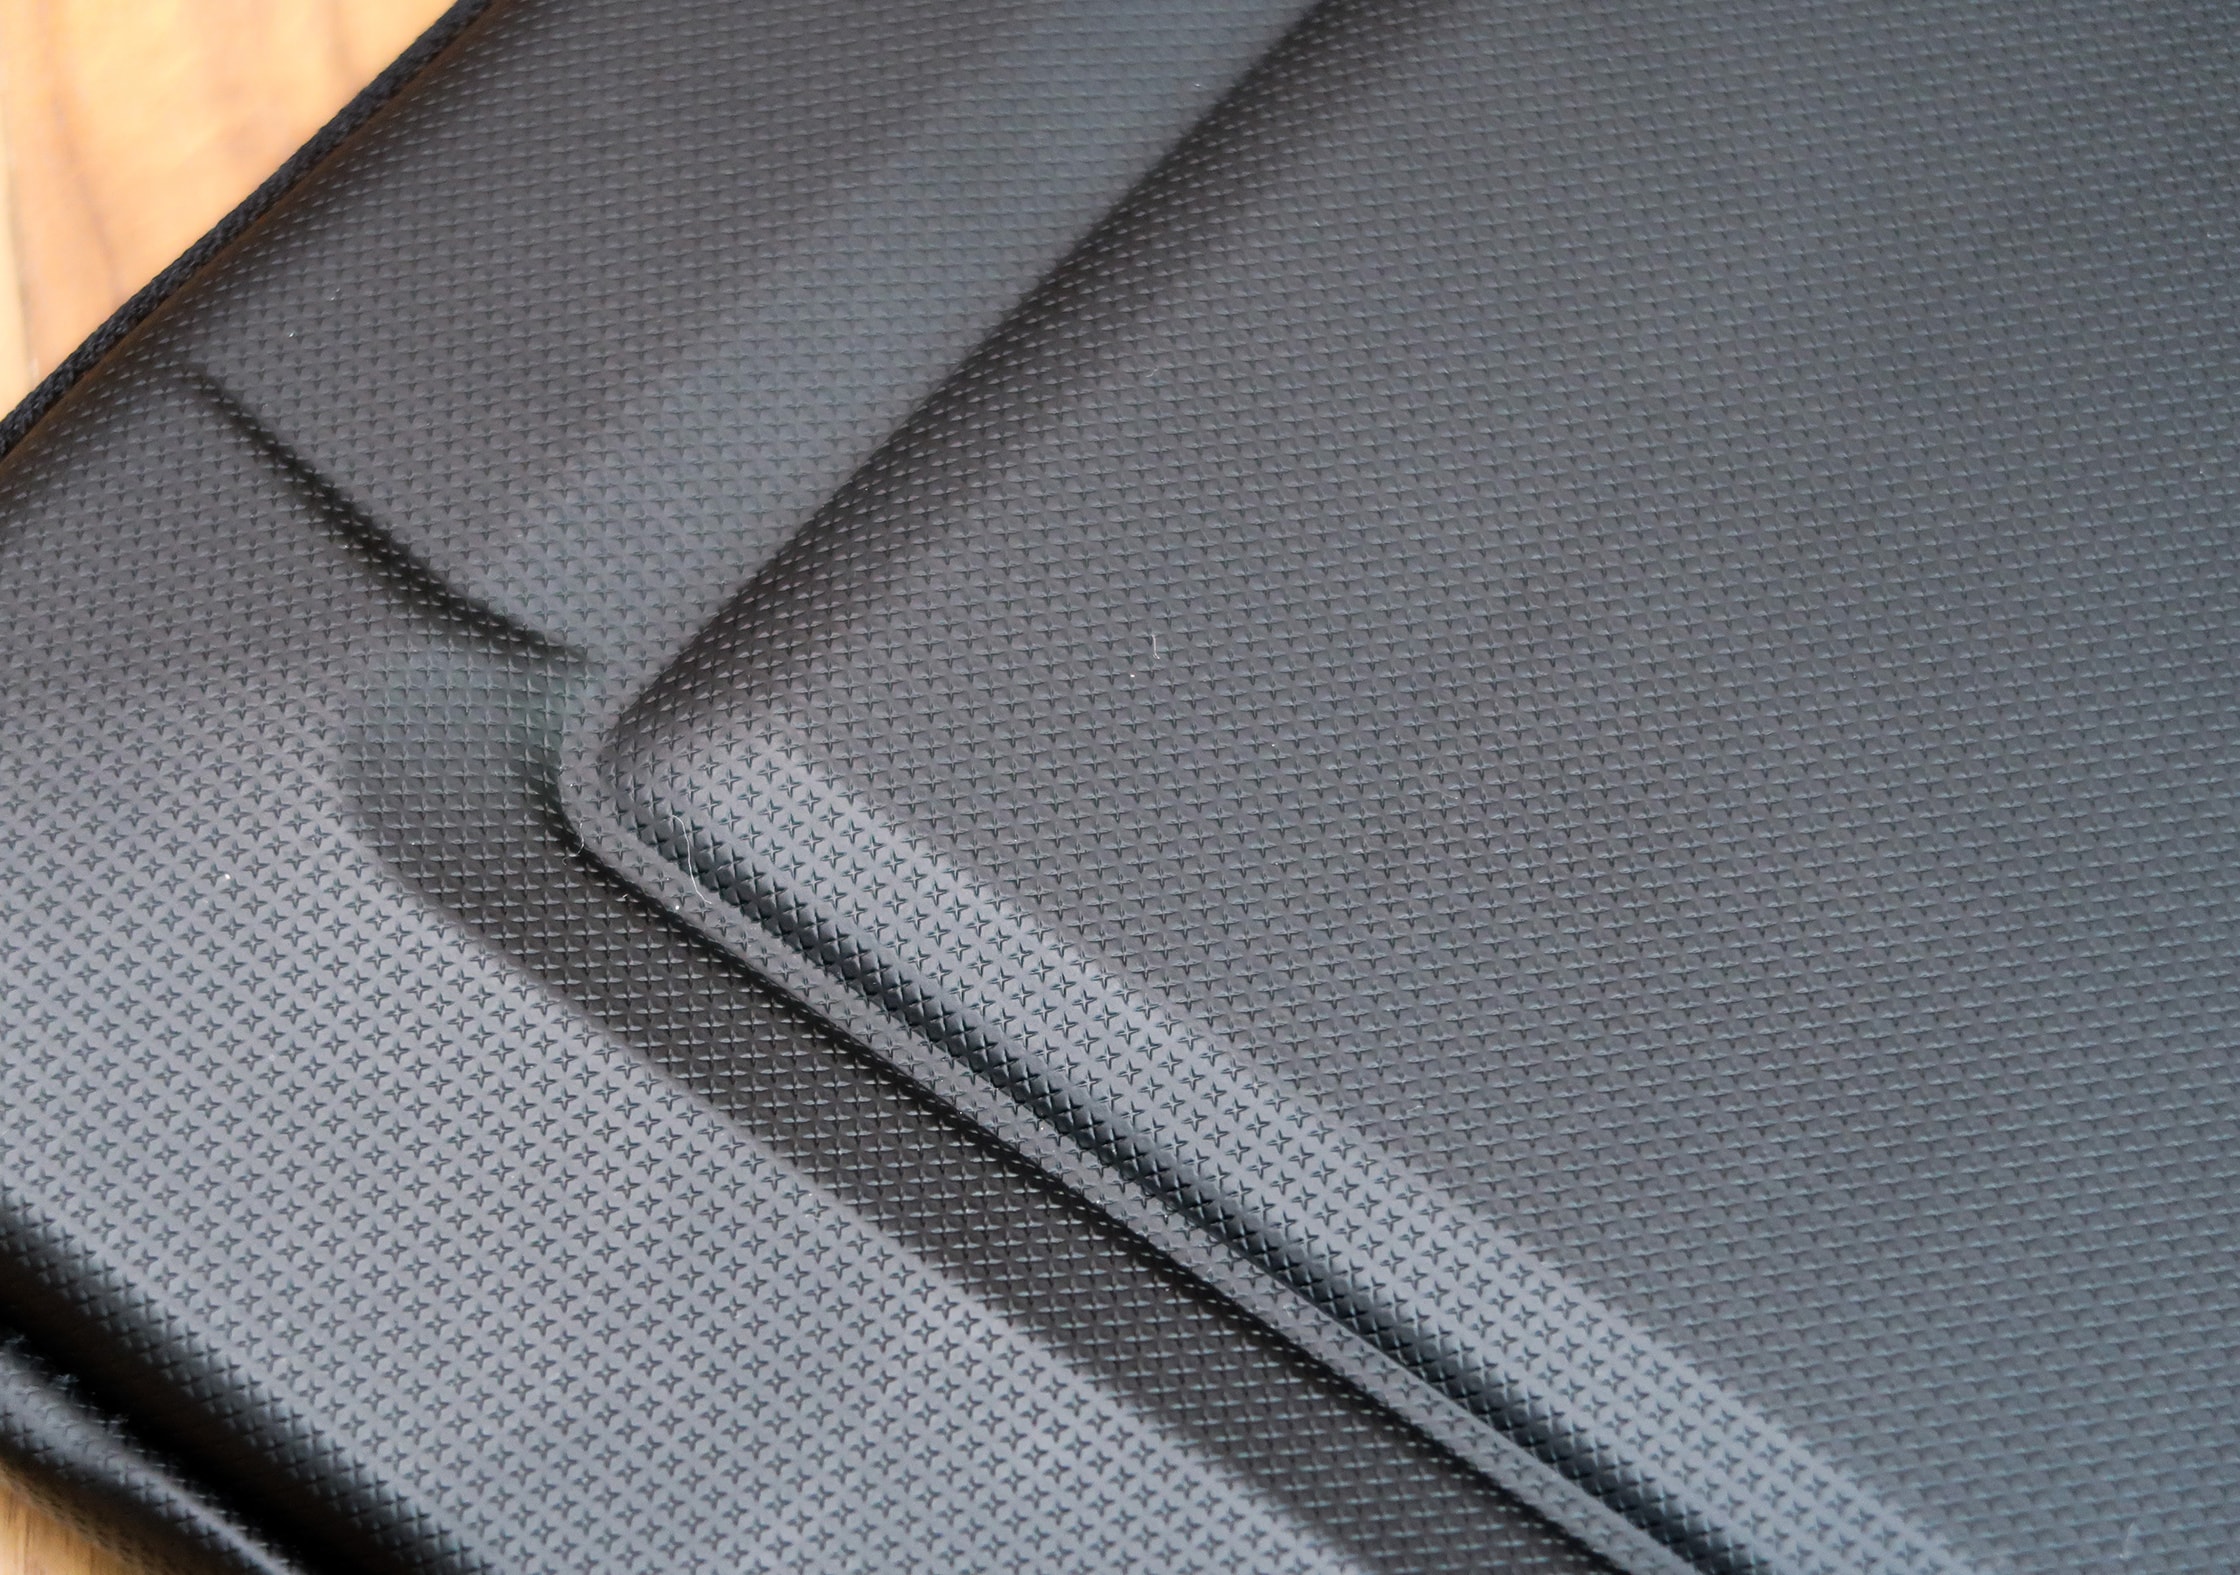 Protective Polyurethane Material On The Thule Gauntlet 3.0 Laptop Sleeve